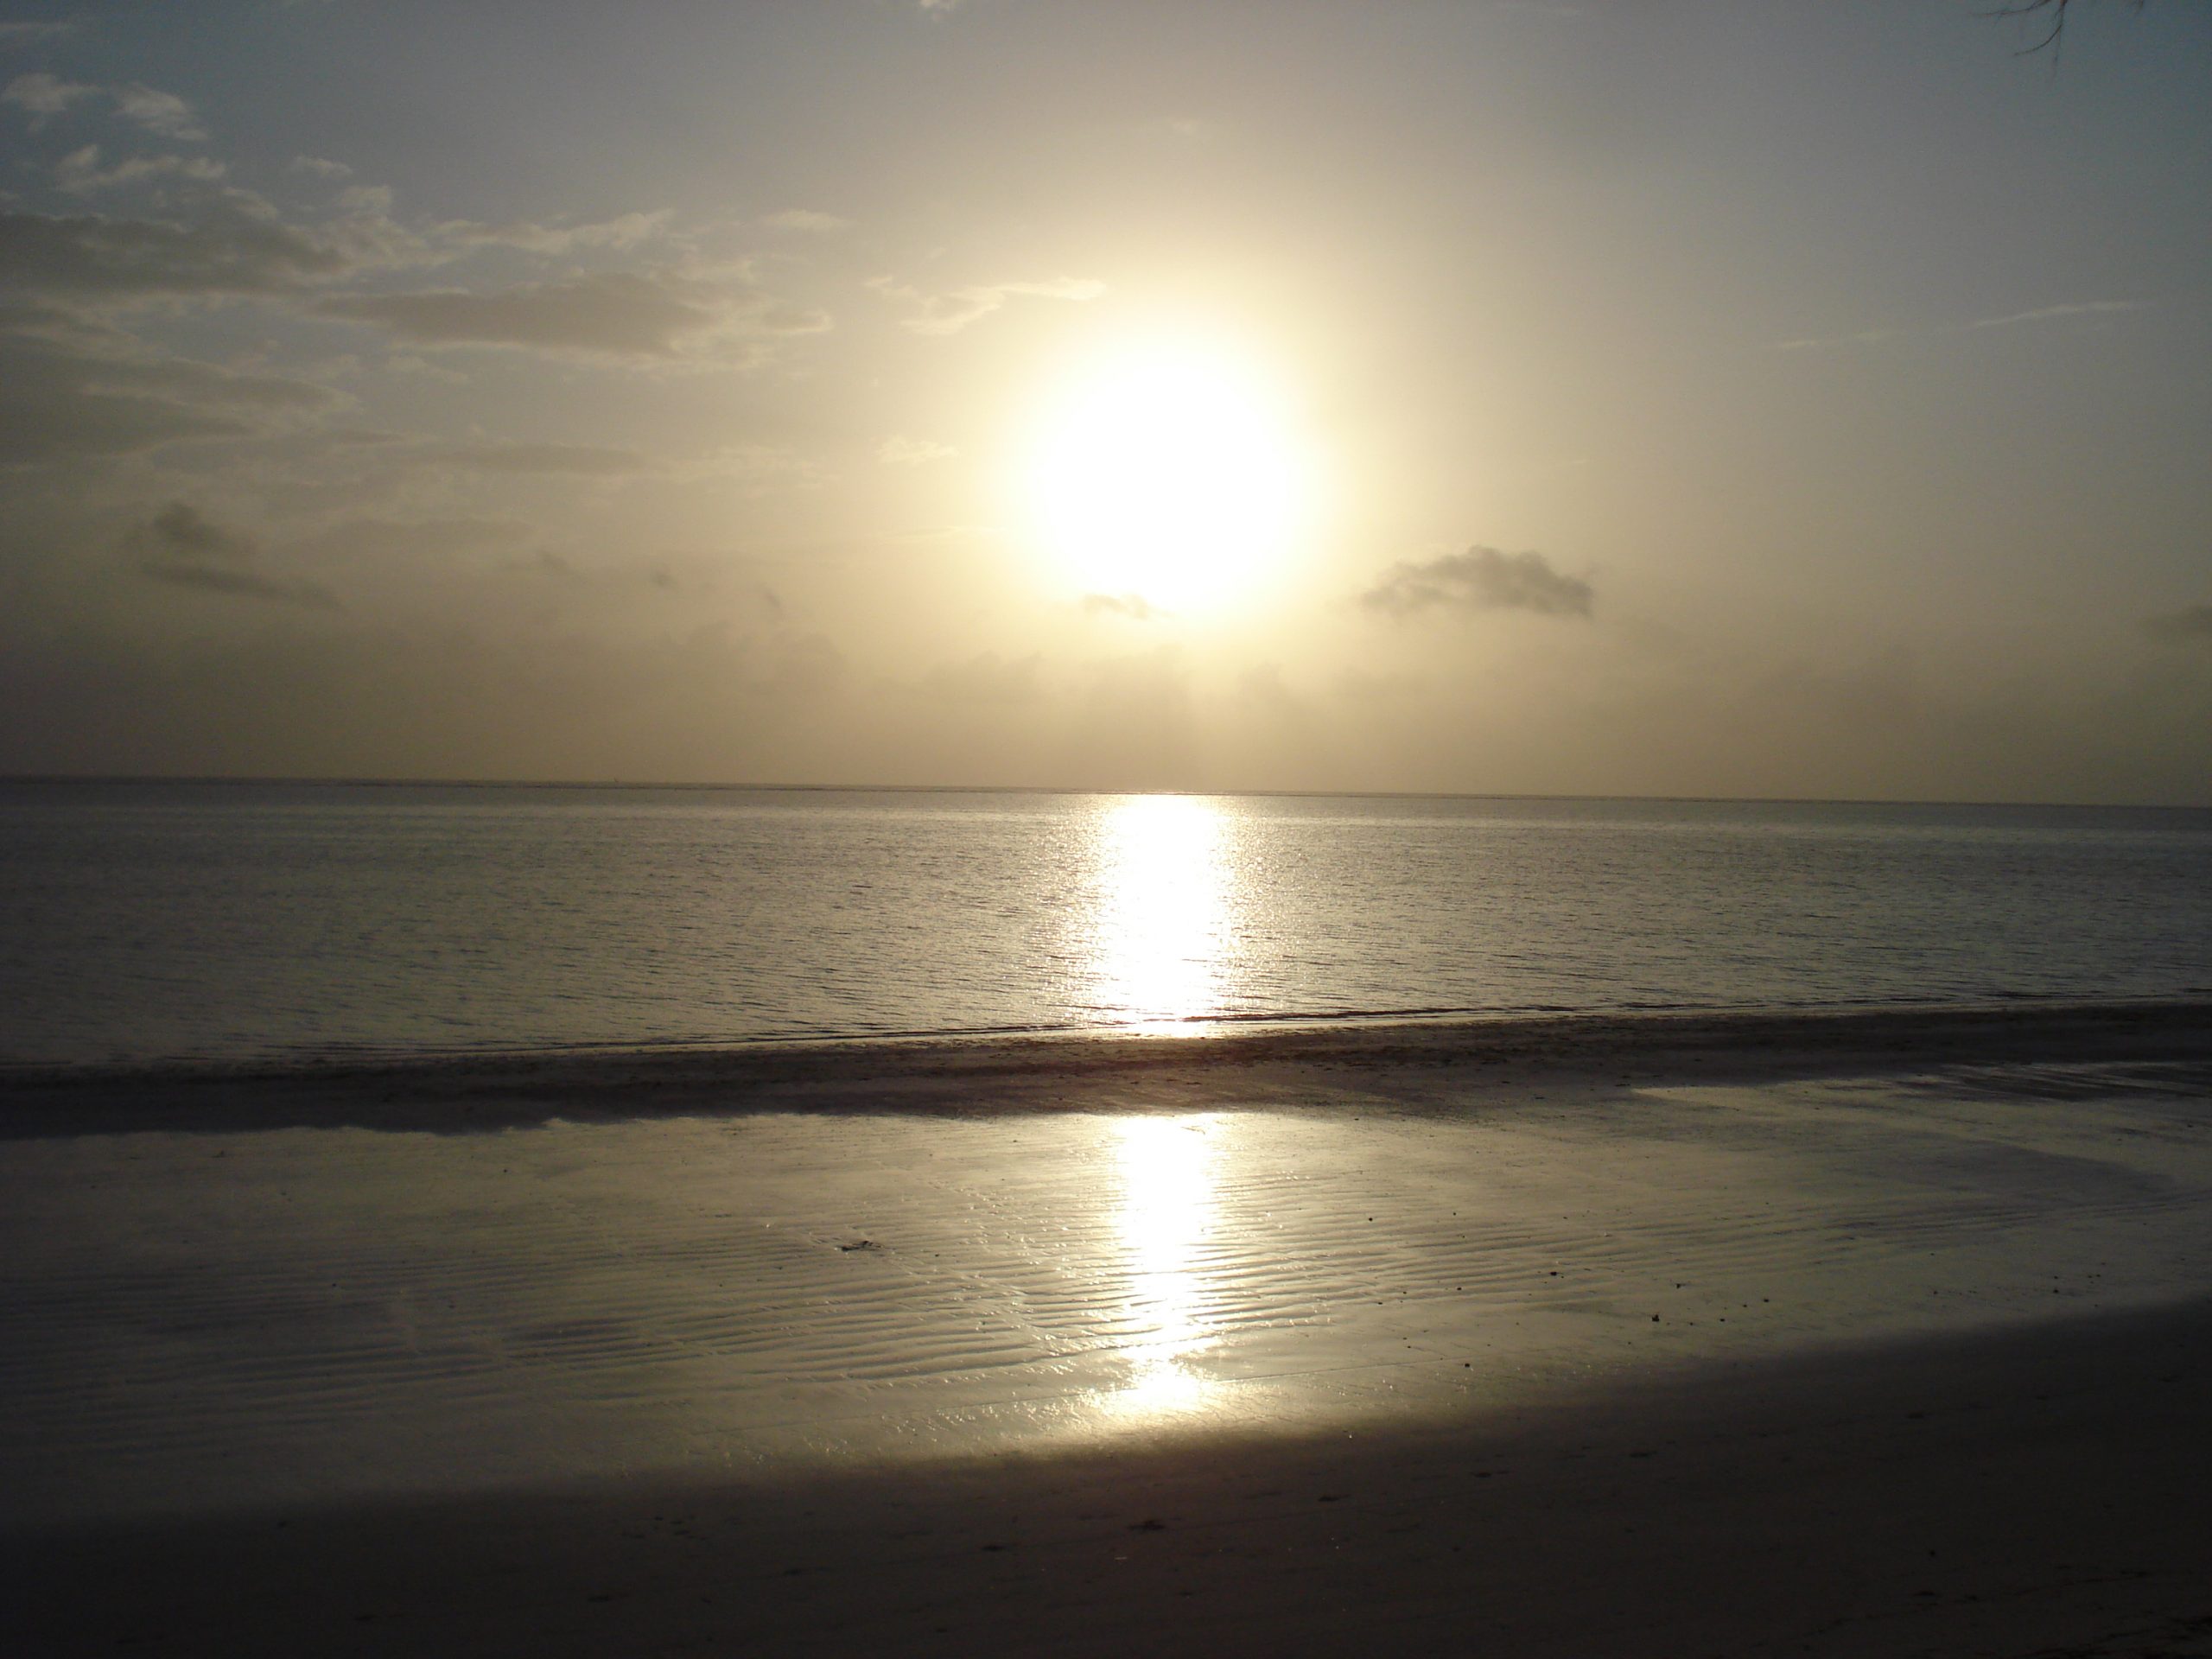 Sunrise at bluebay and sultan sands